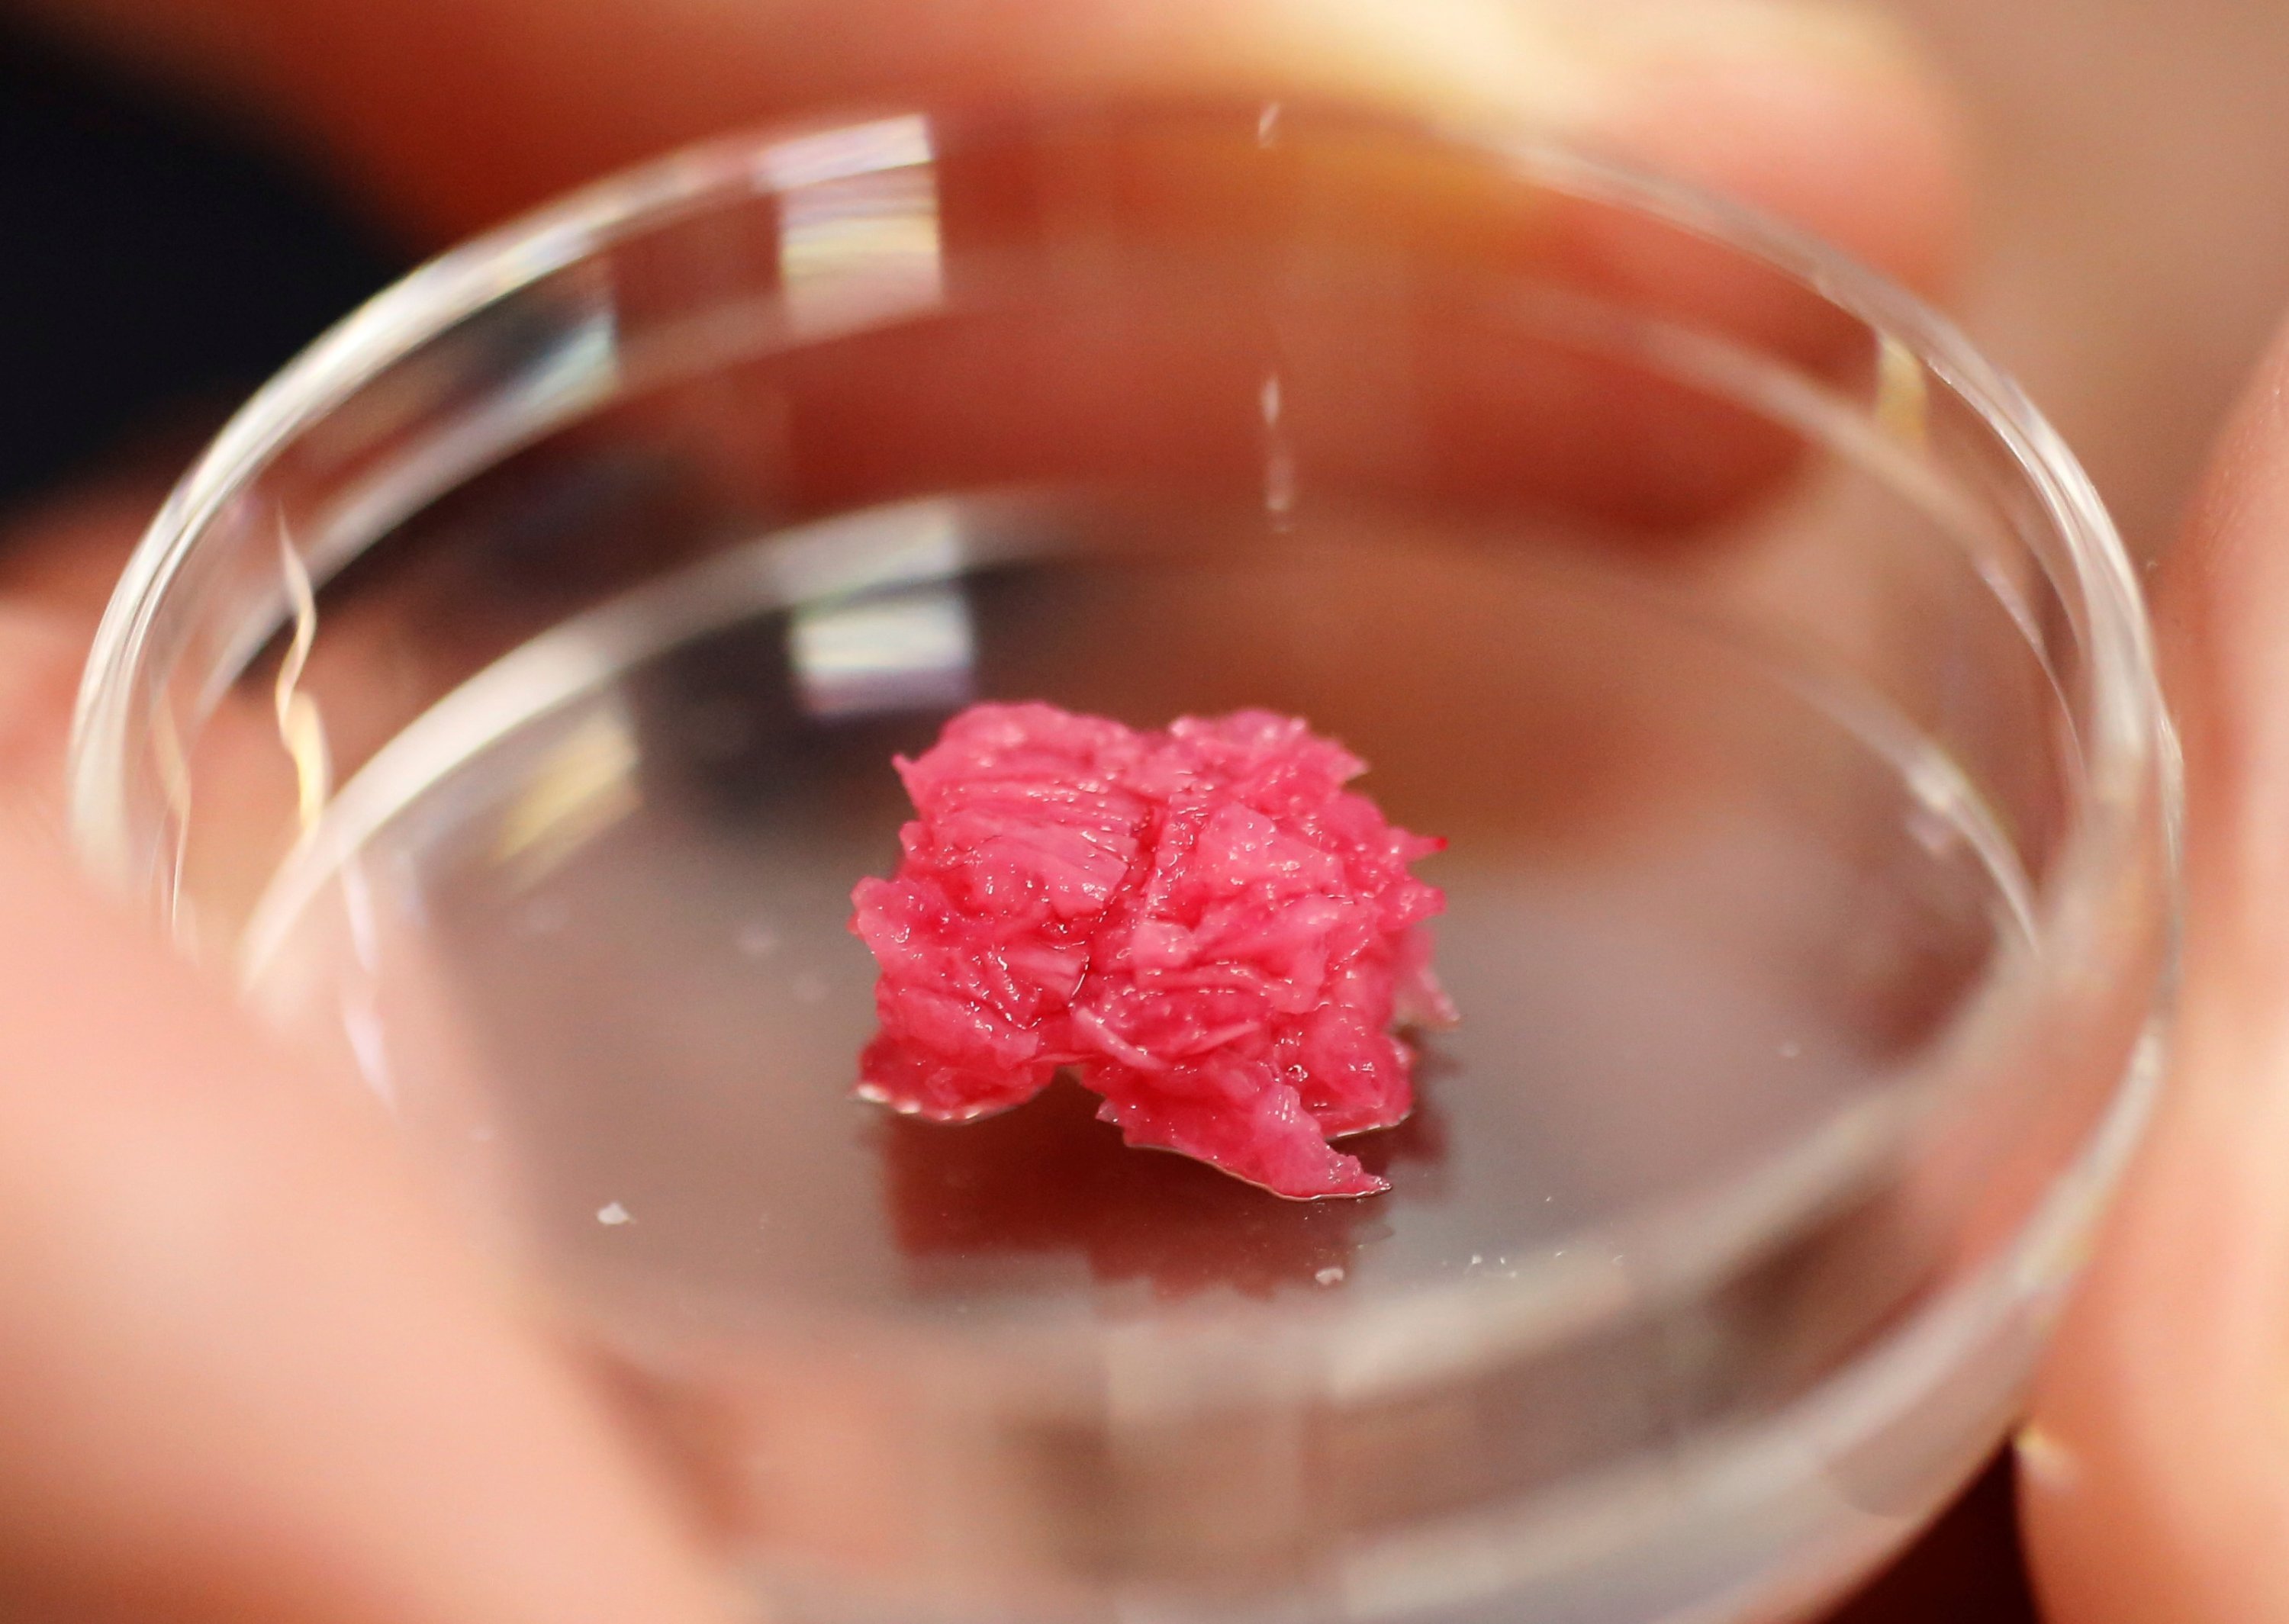 Japanese researcher pushes the boundaries of lab-grown 'real' meat